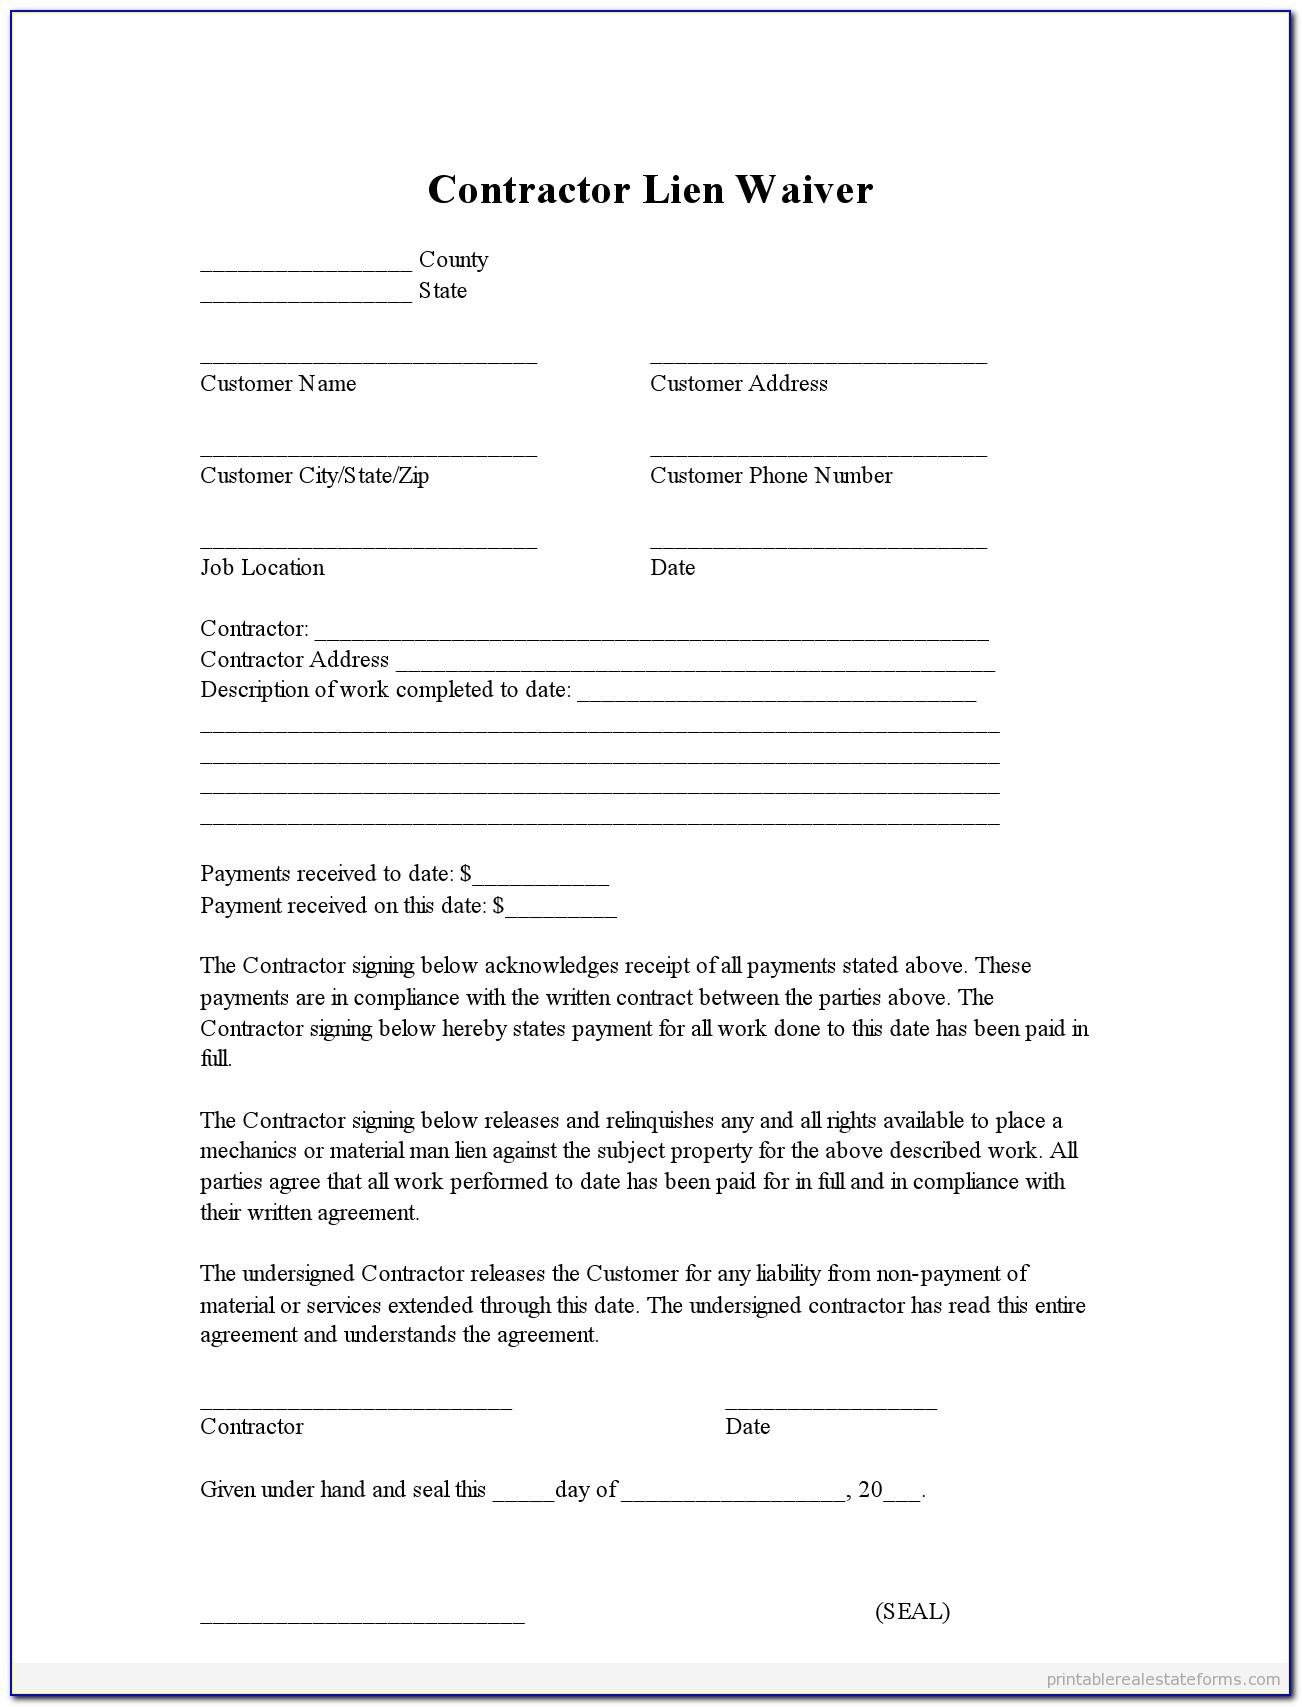 Conditional Lien Waiver Form